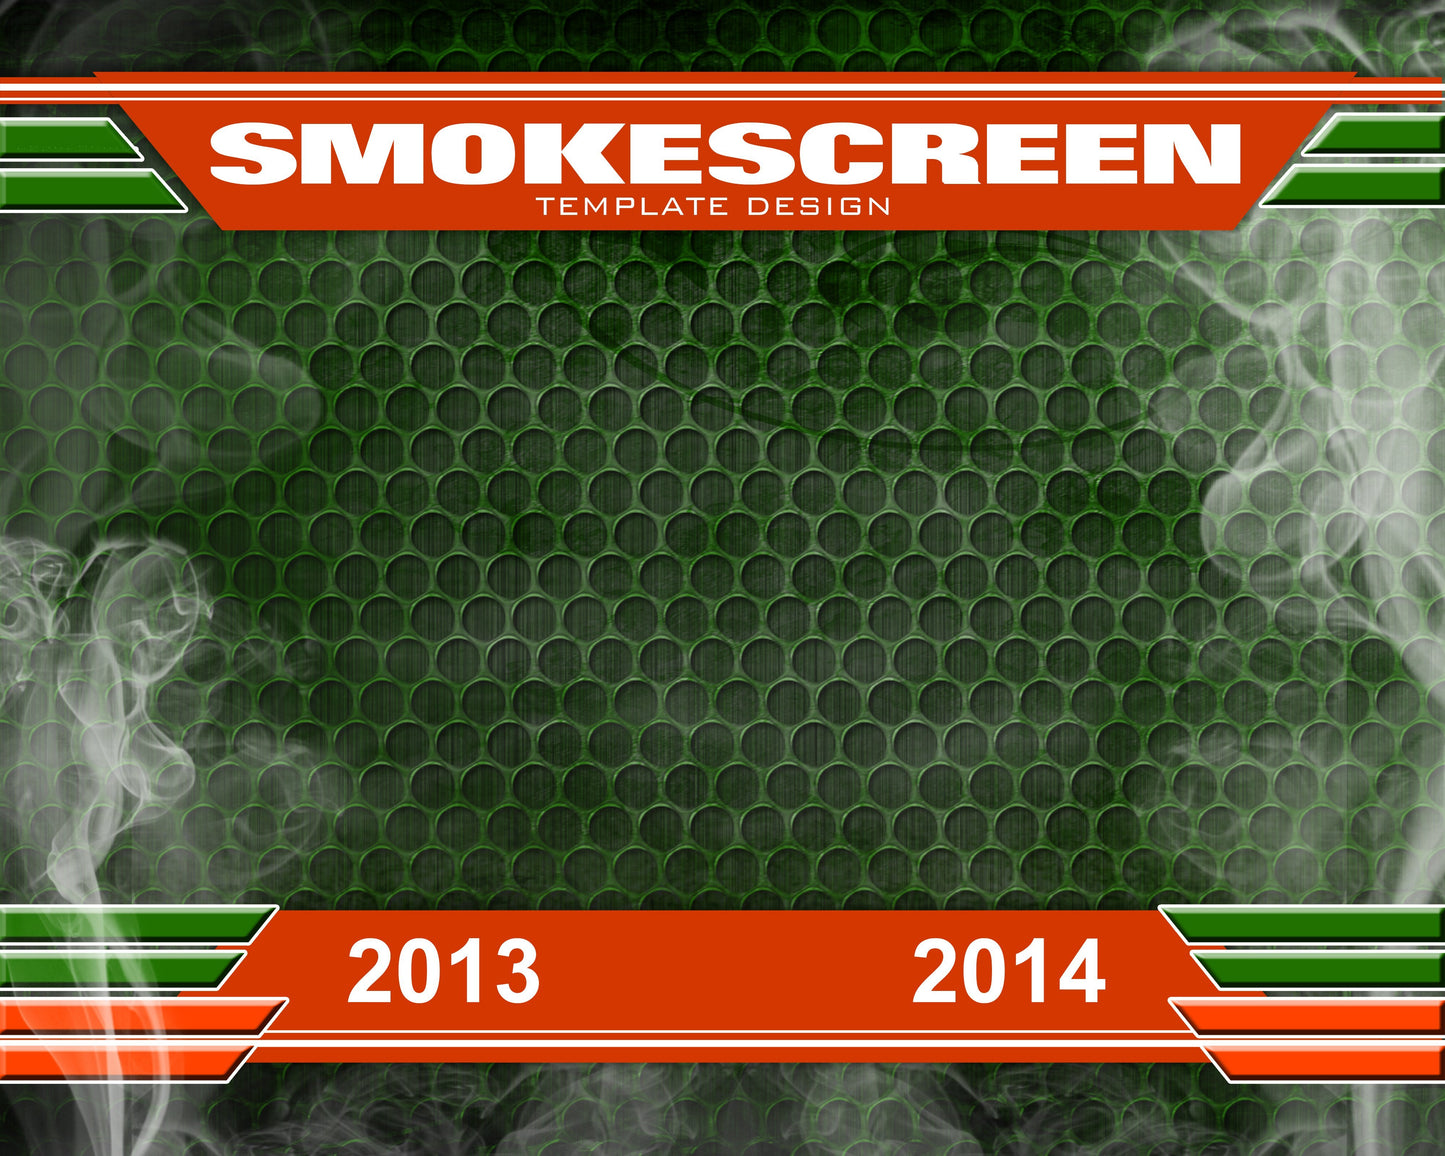 Smoke Screen v.1 - Xtreme Team-Photoshop Template - Photo Solutions